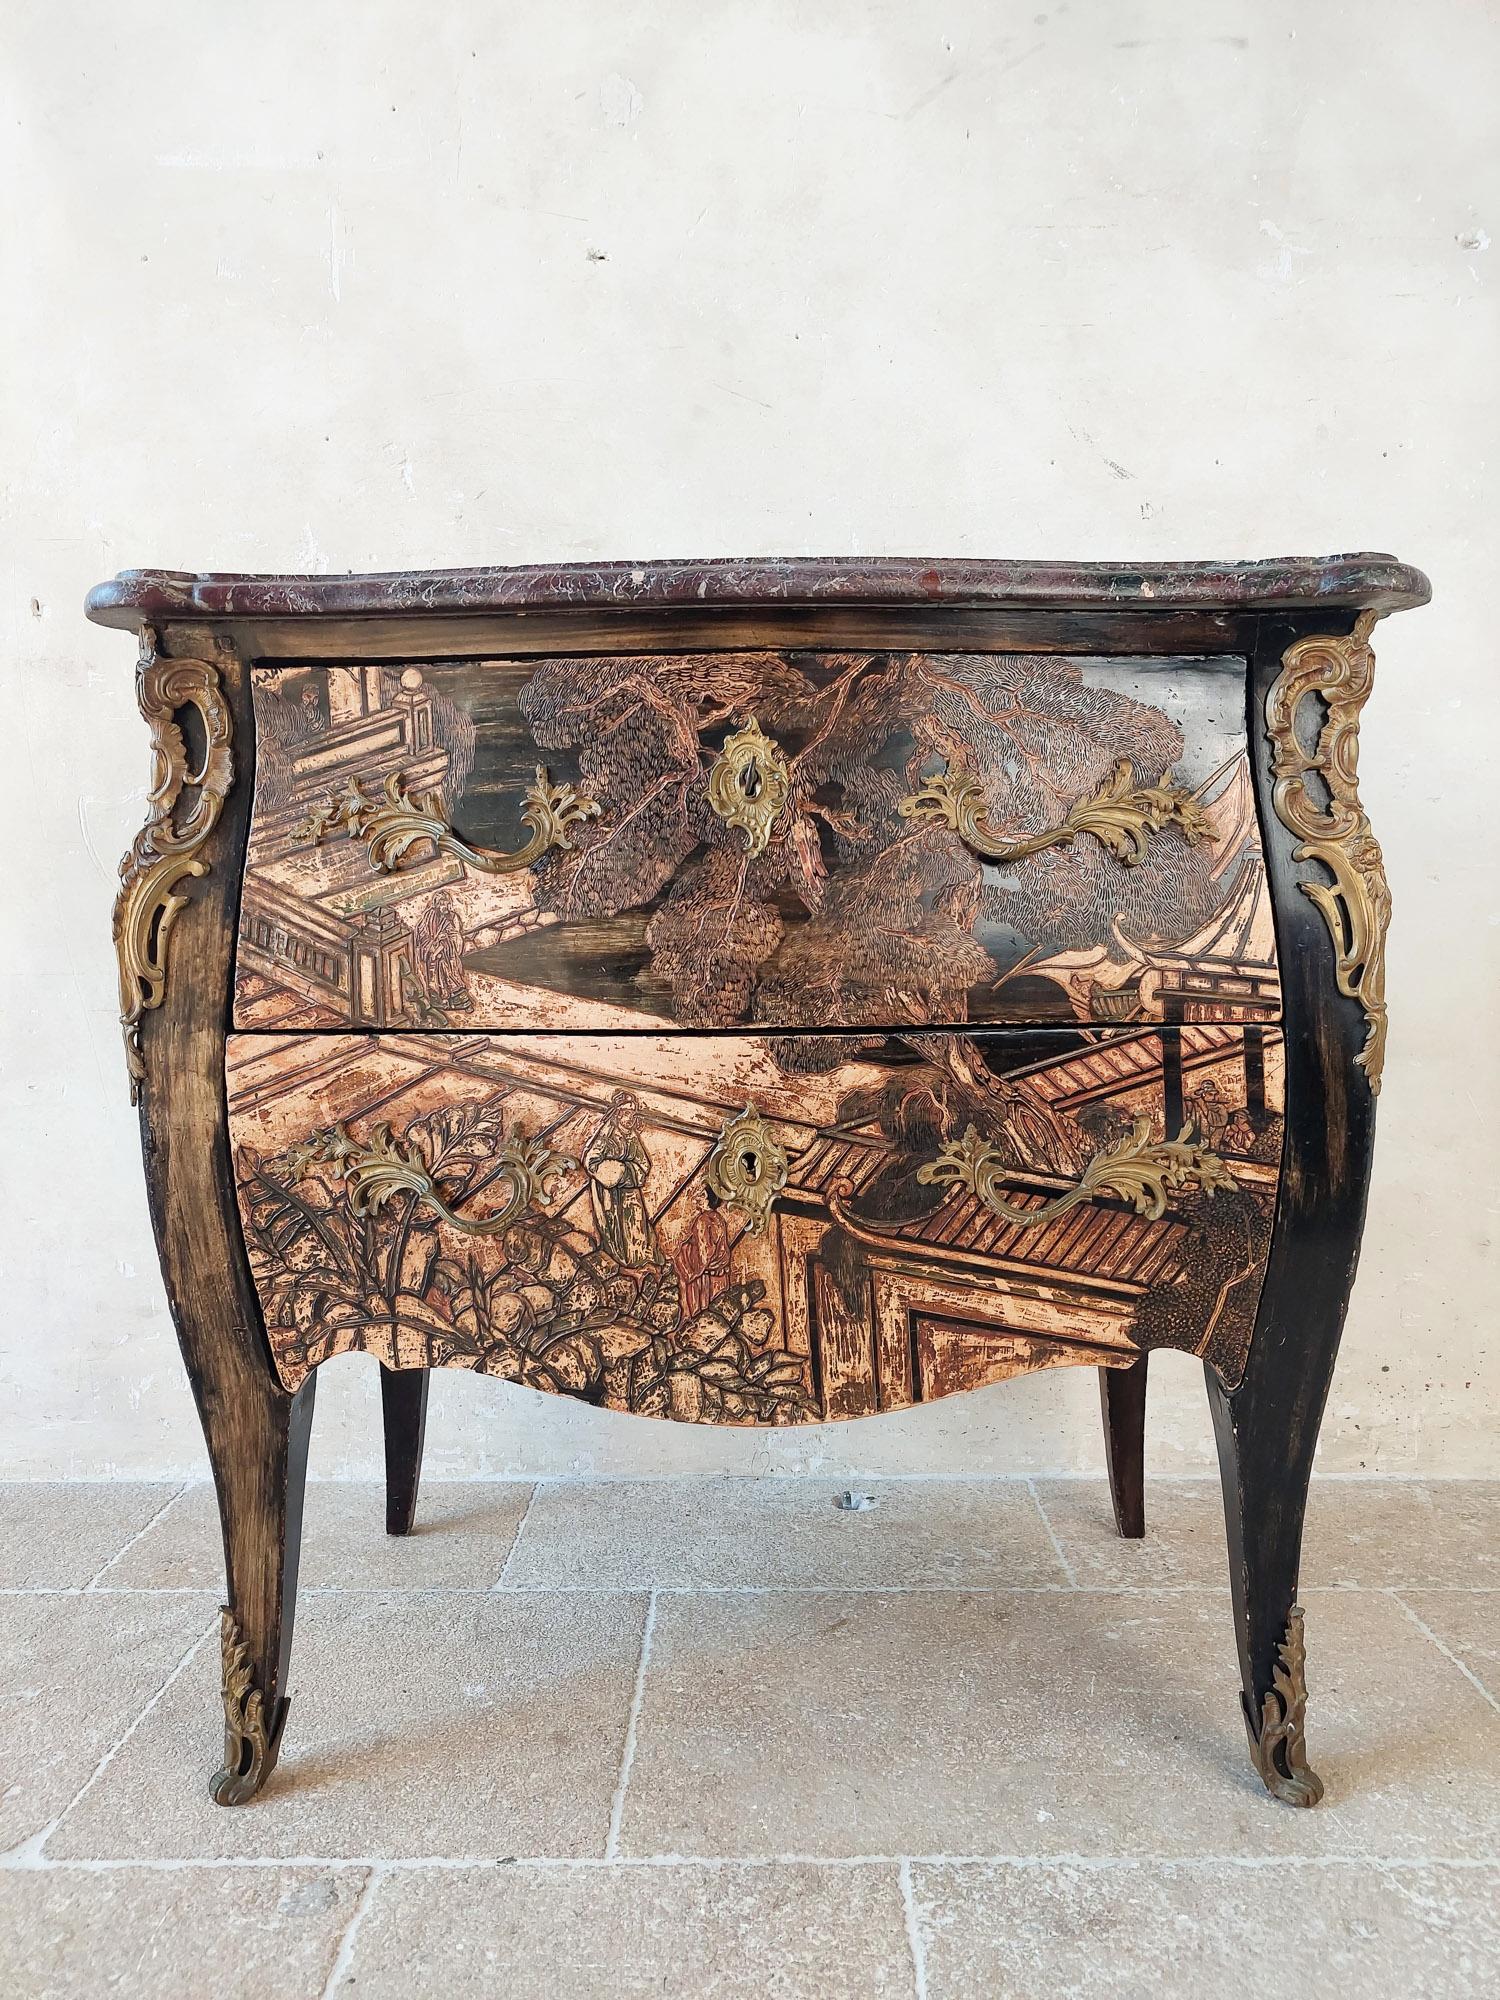 Antique French Chinoiserie Commode 19th Century In Good Condition For Sale In Baambrugge, NL